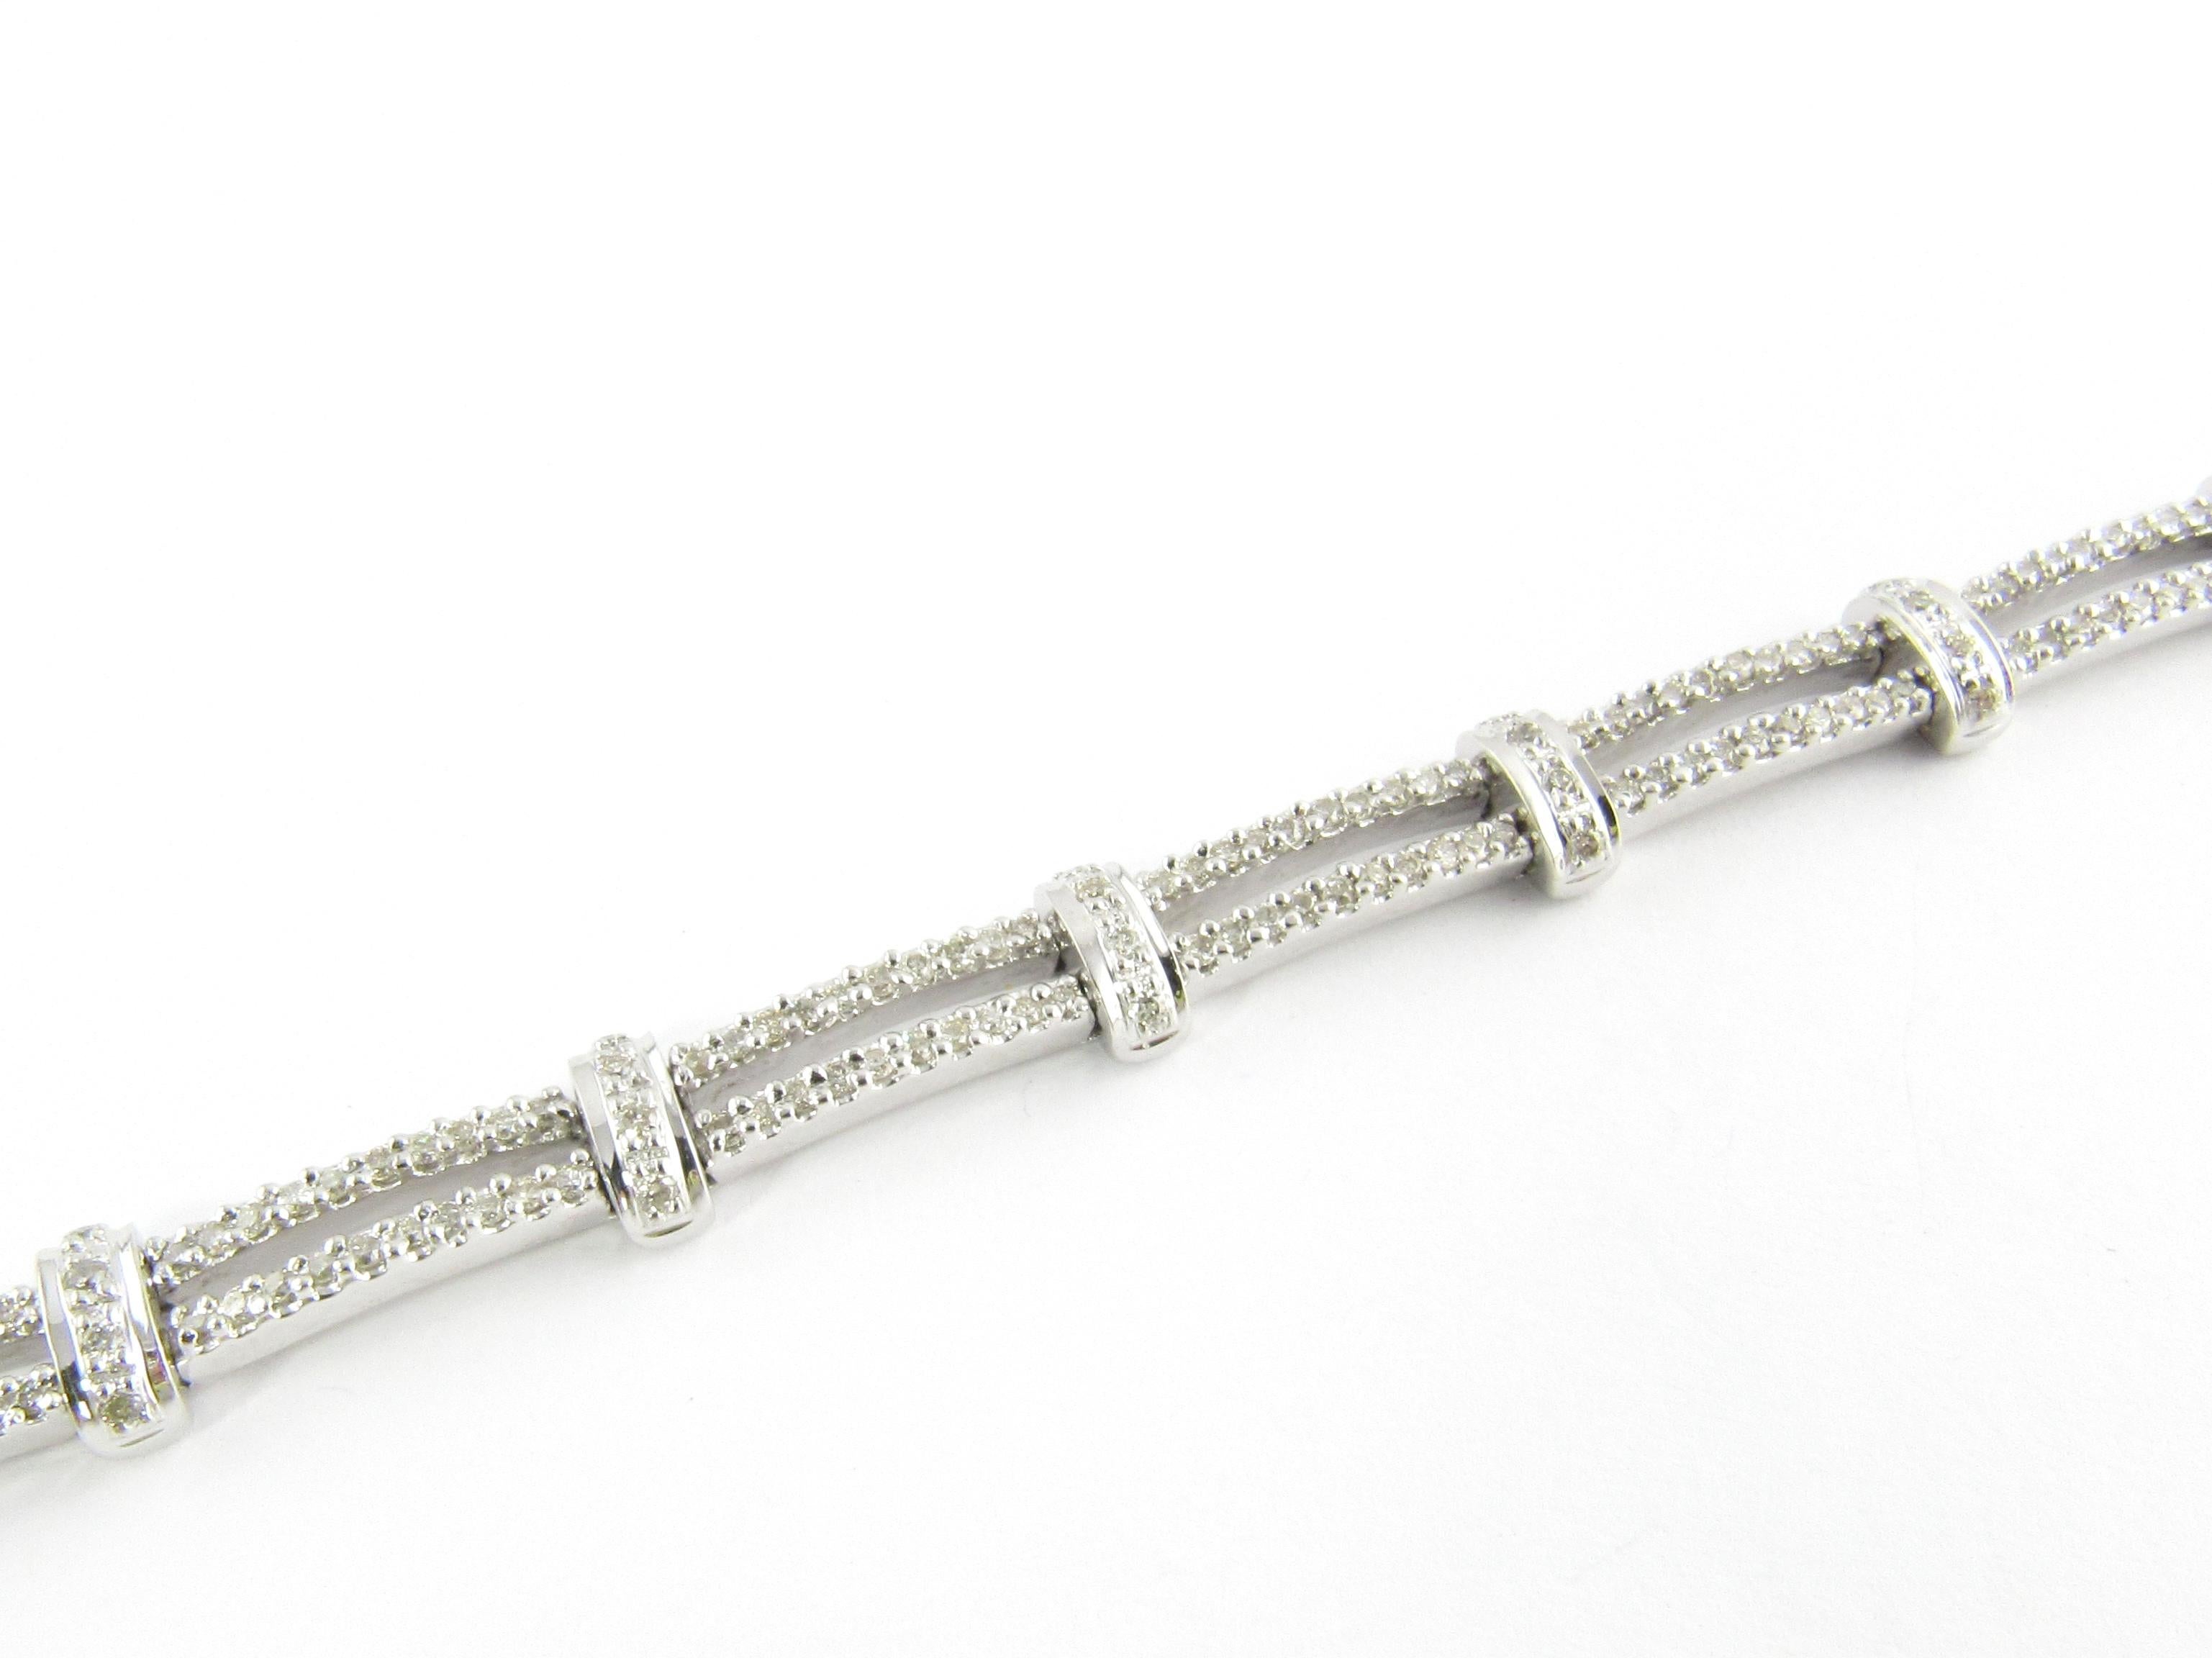 Vintage 14 Karat White Gold Diamond Bracelet

This stunning bracelet features 284 round brilliant cut diamonds set in beautifully detailed 14K white gold. Width: 6 mm. Safety closure.

Approximate total weight: 1.4 cts.

Diamond color: K-L

Diamond